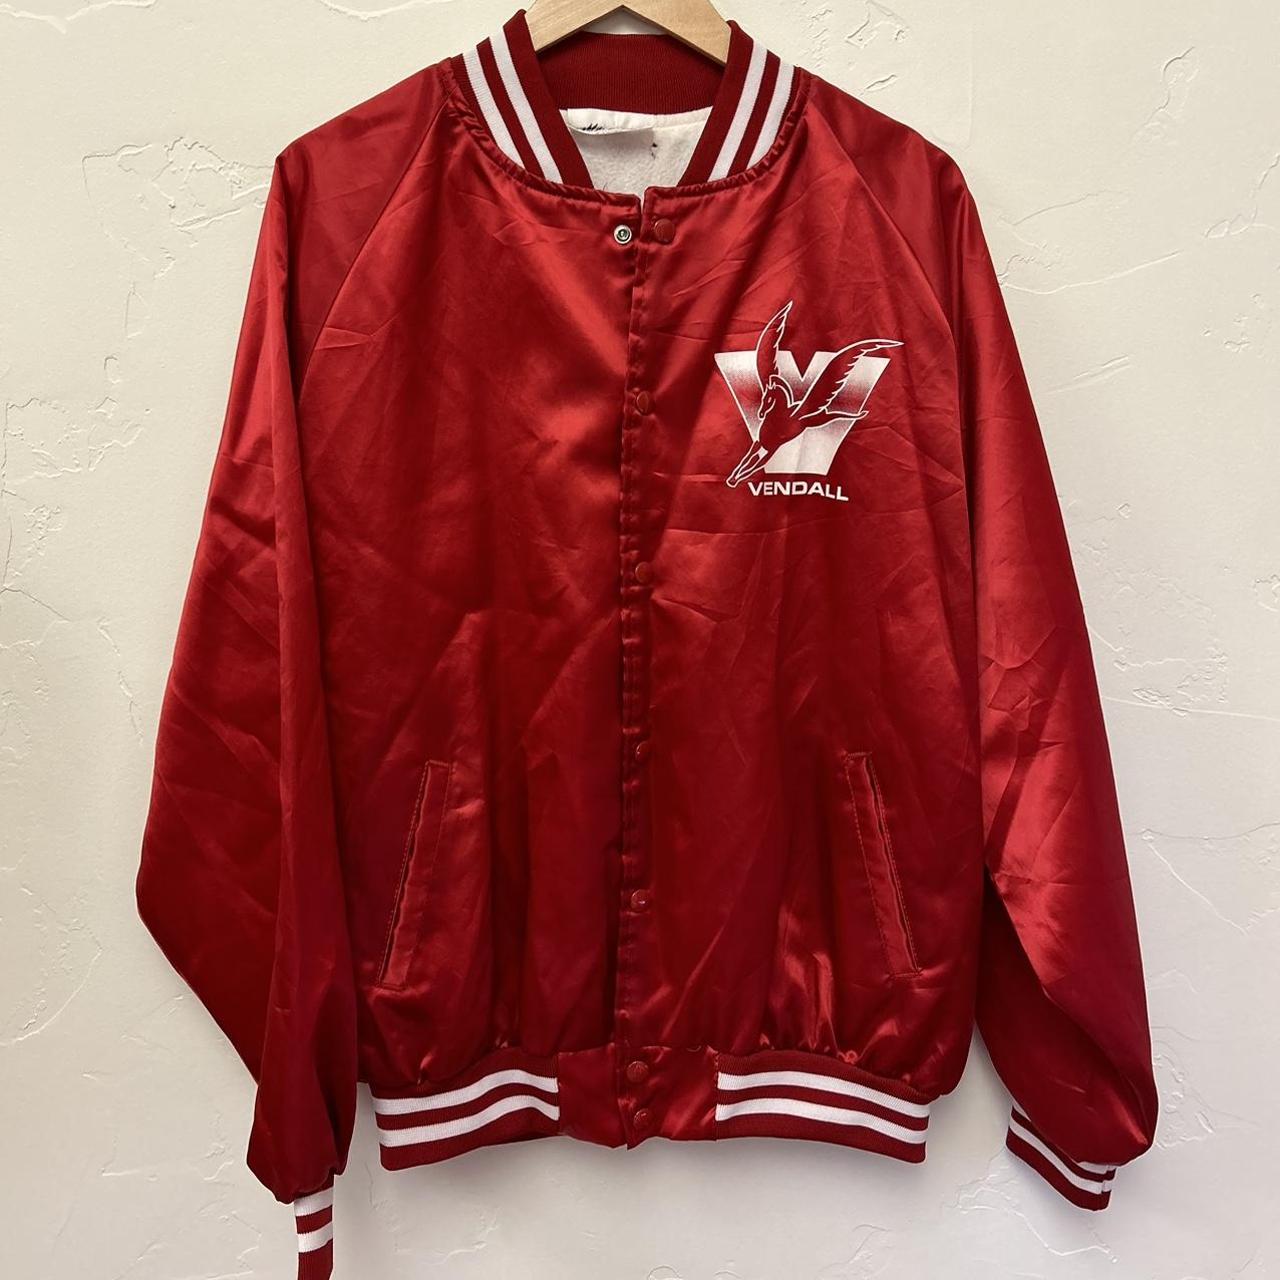 Men's Red and White Jacket | Depop